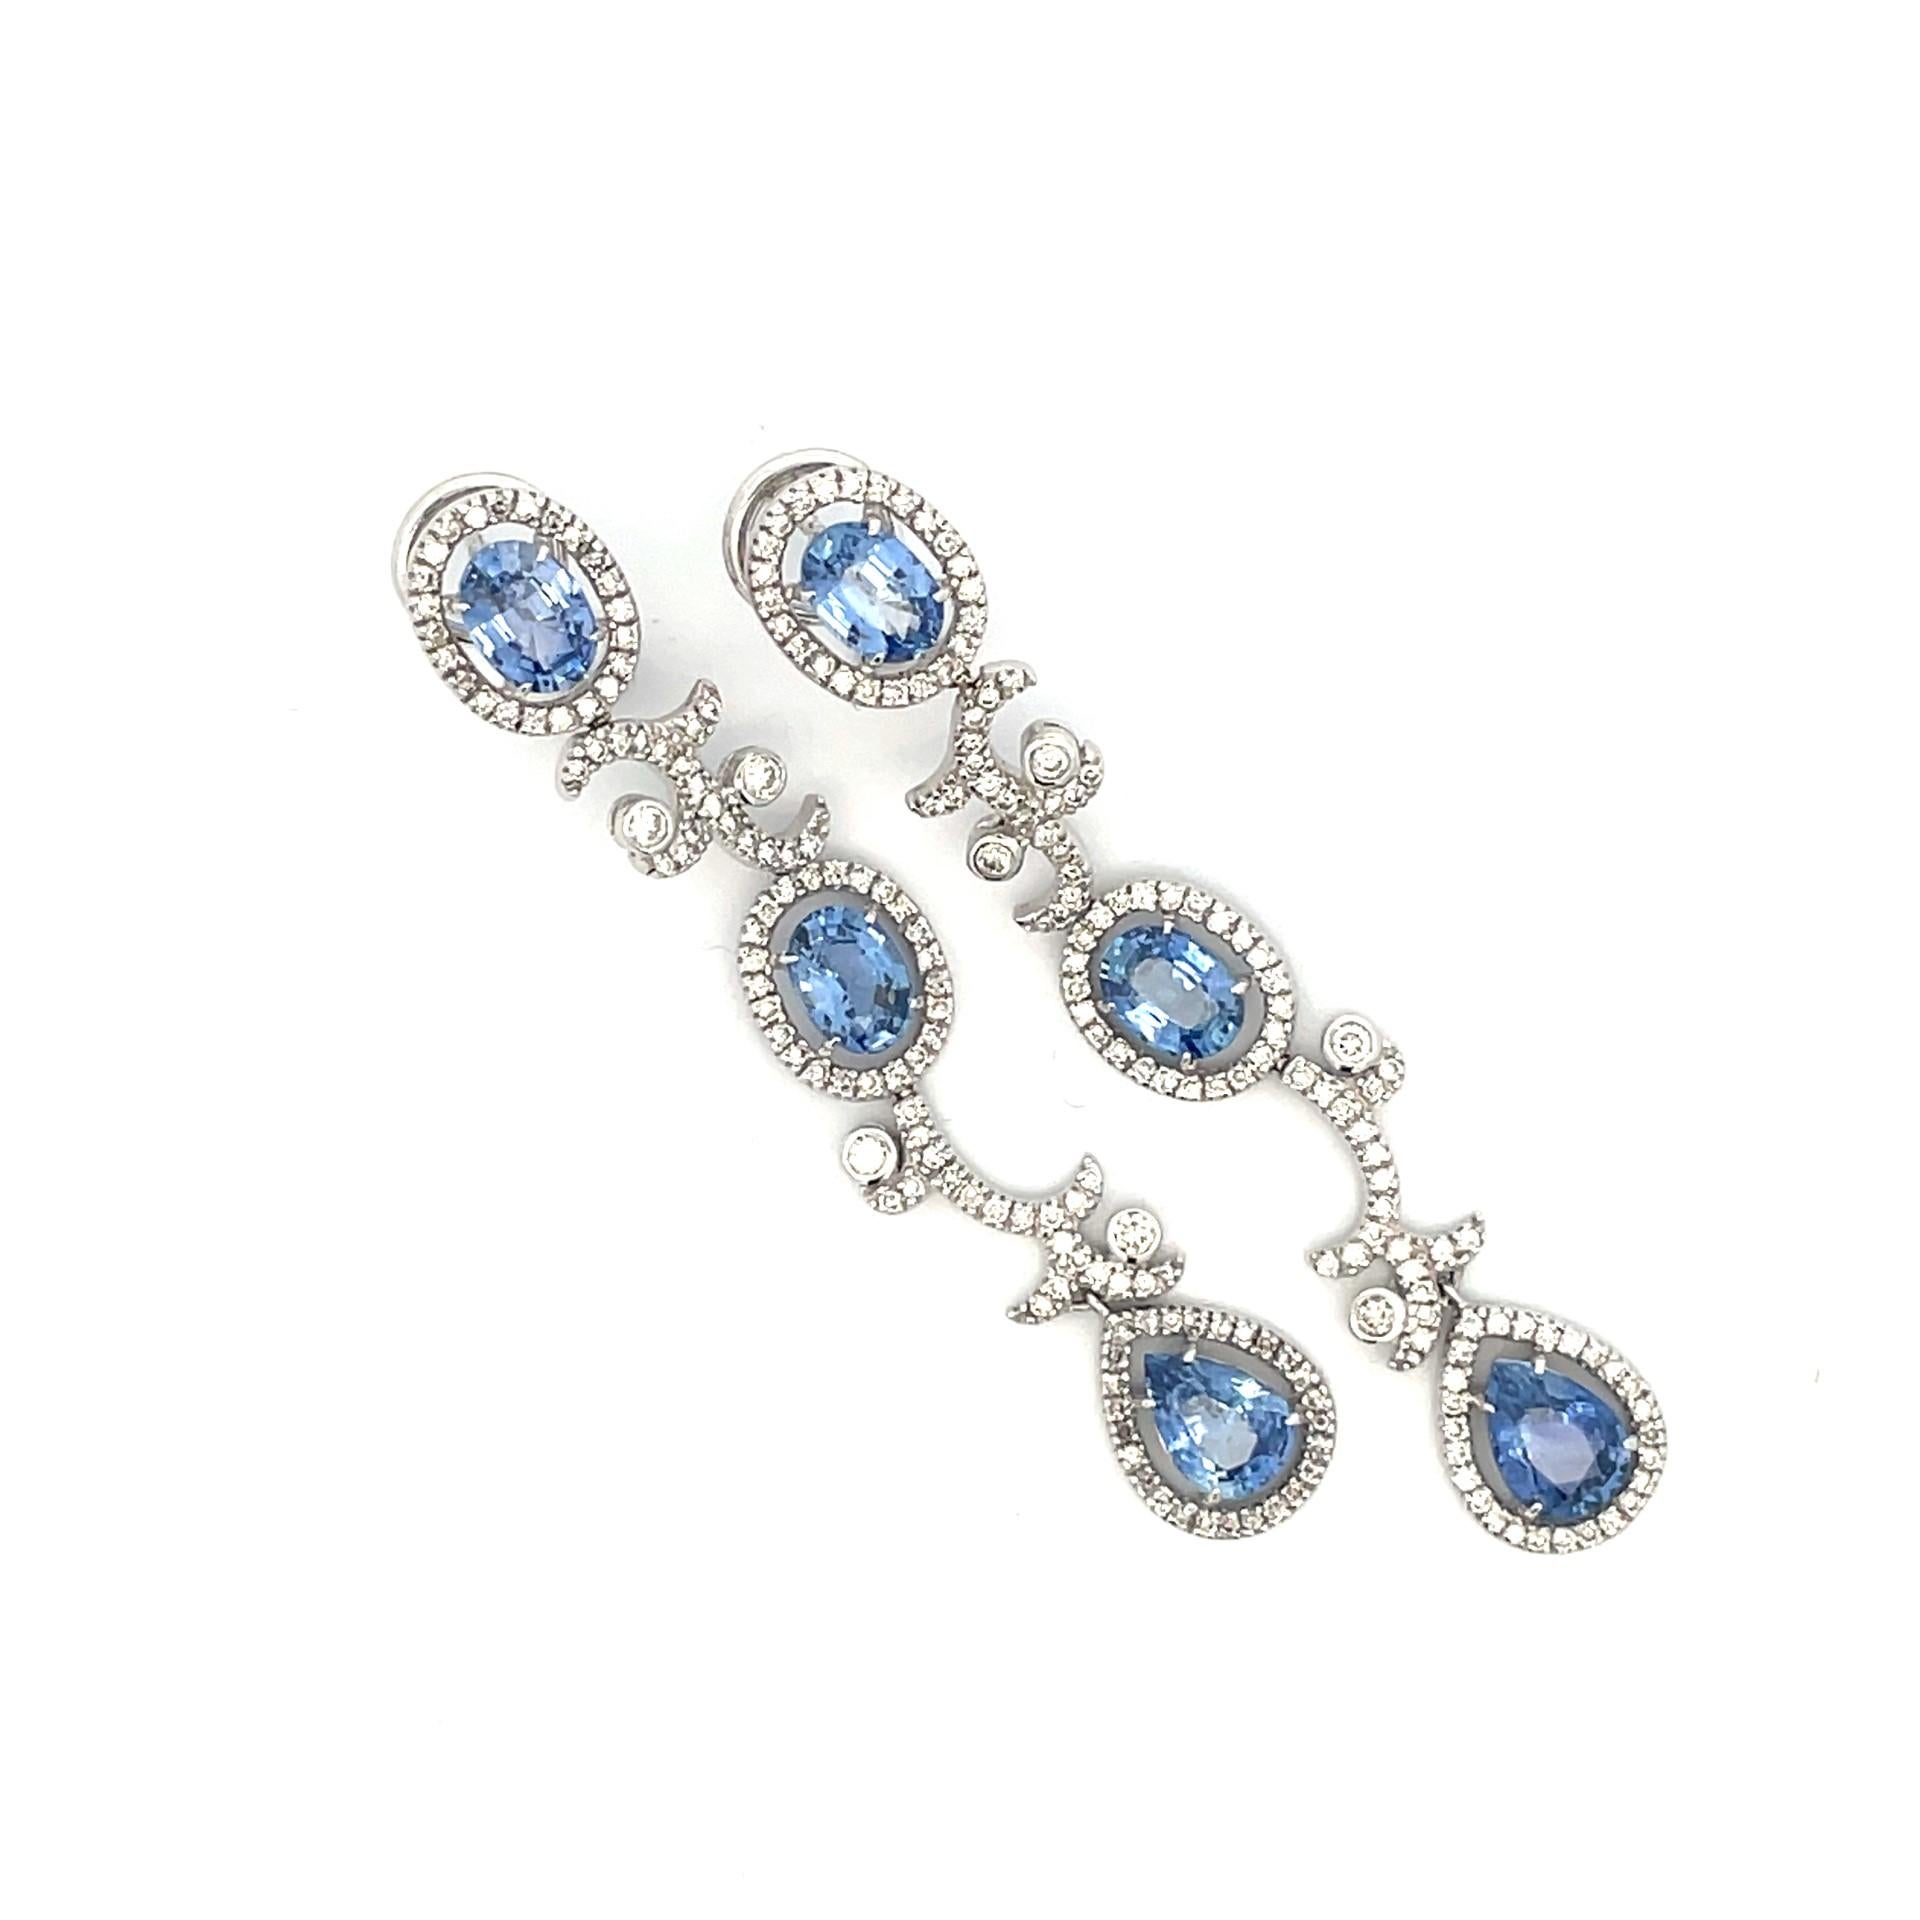 A pair of 18kt white gold oval and pear shape earrings set with natural oval and pear shape Ceylon blue sapphires and white diamonds with straight post and omega clip system. Add an elegant touch to any special occasion!

2 natural pear shape Ceylon